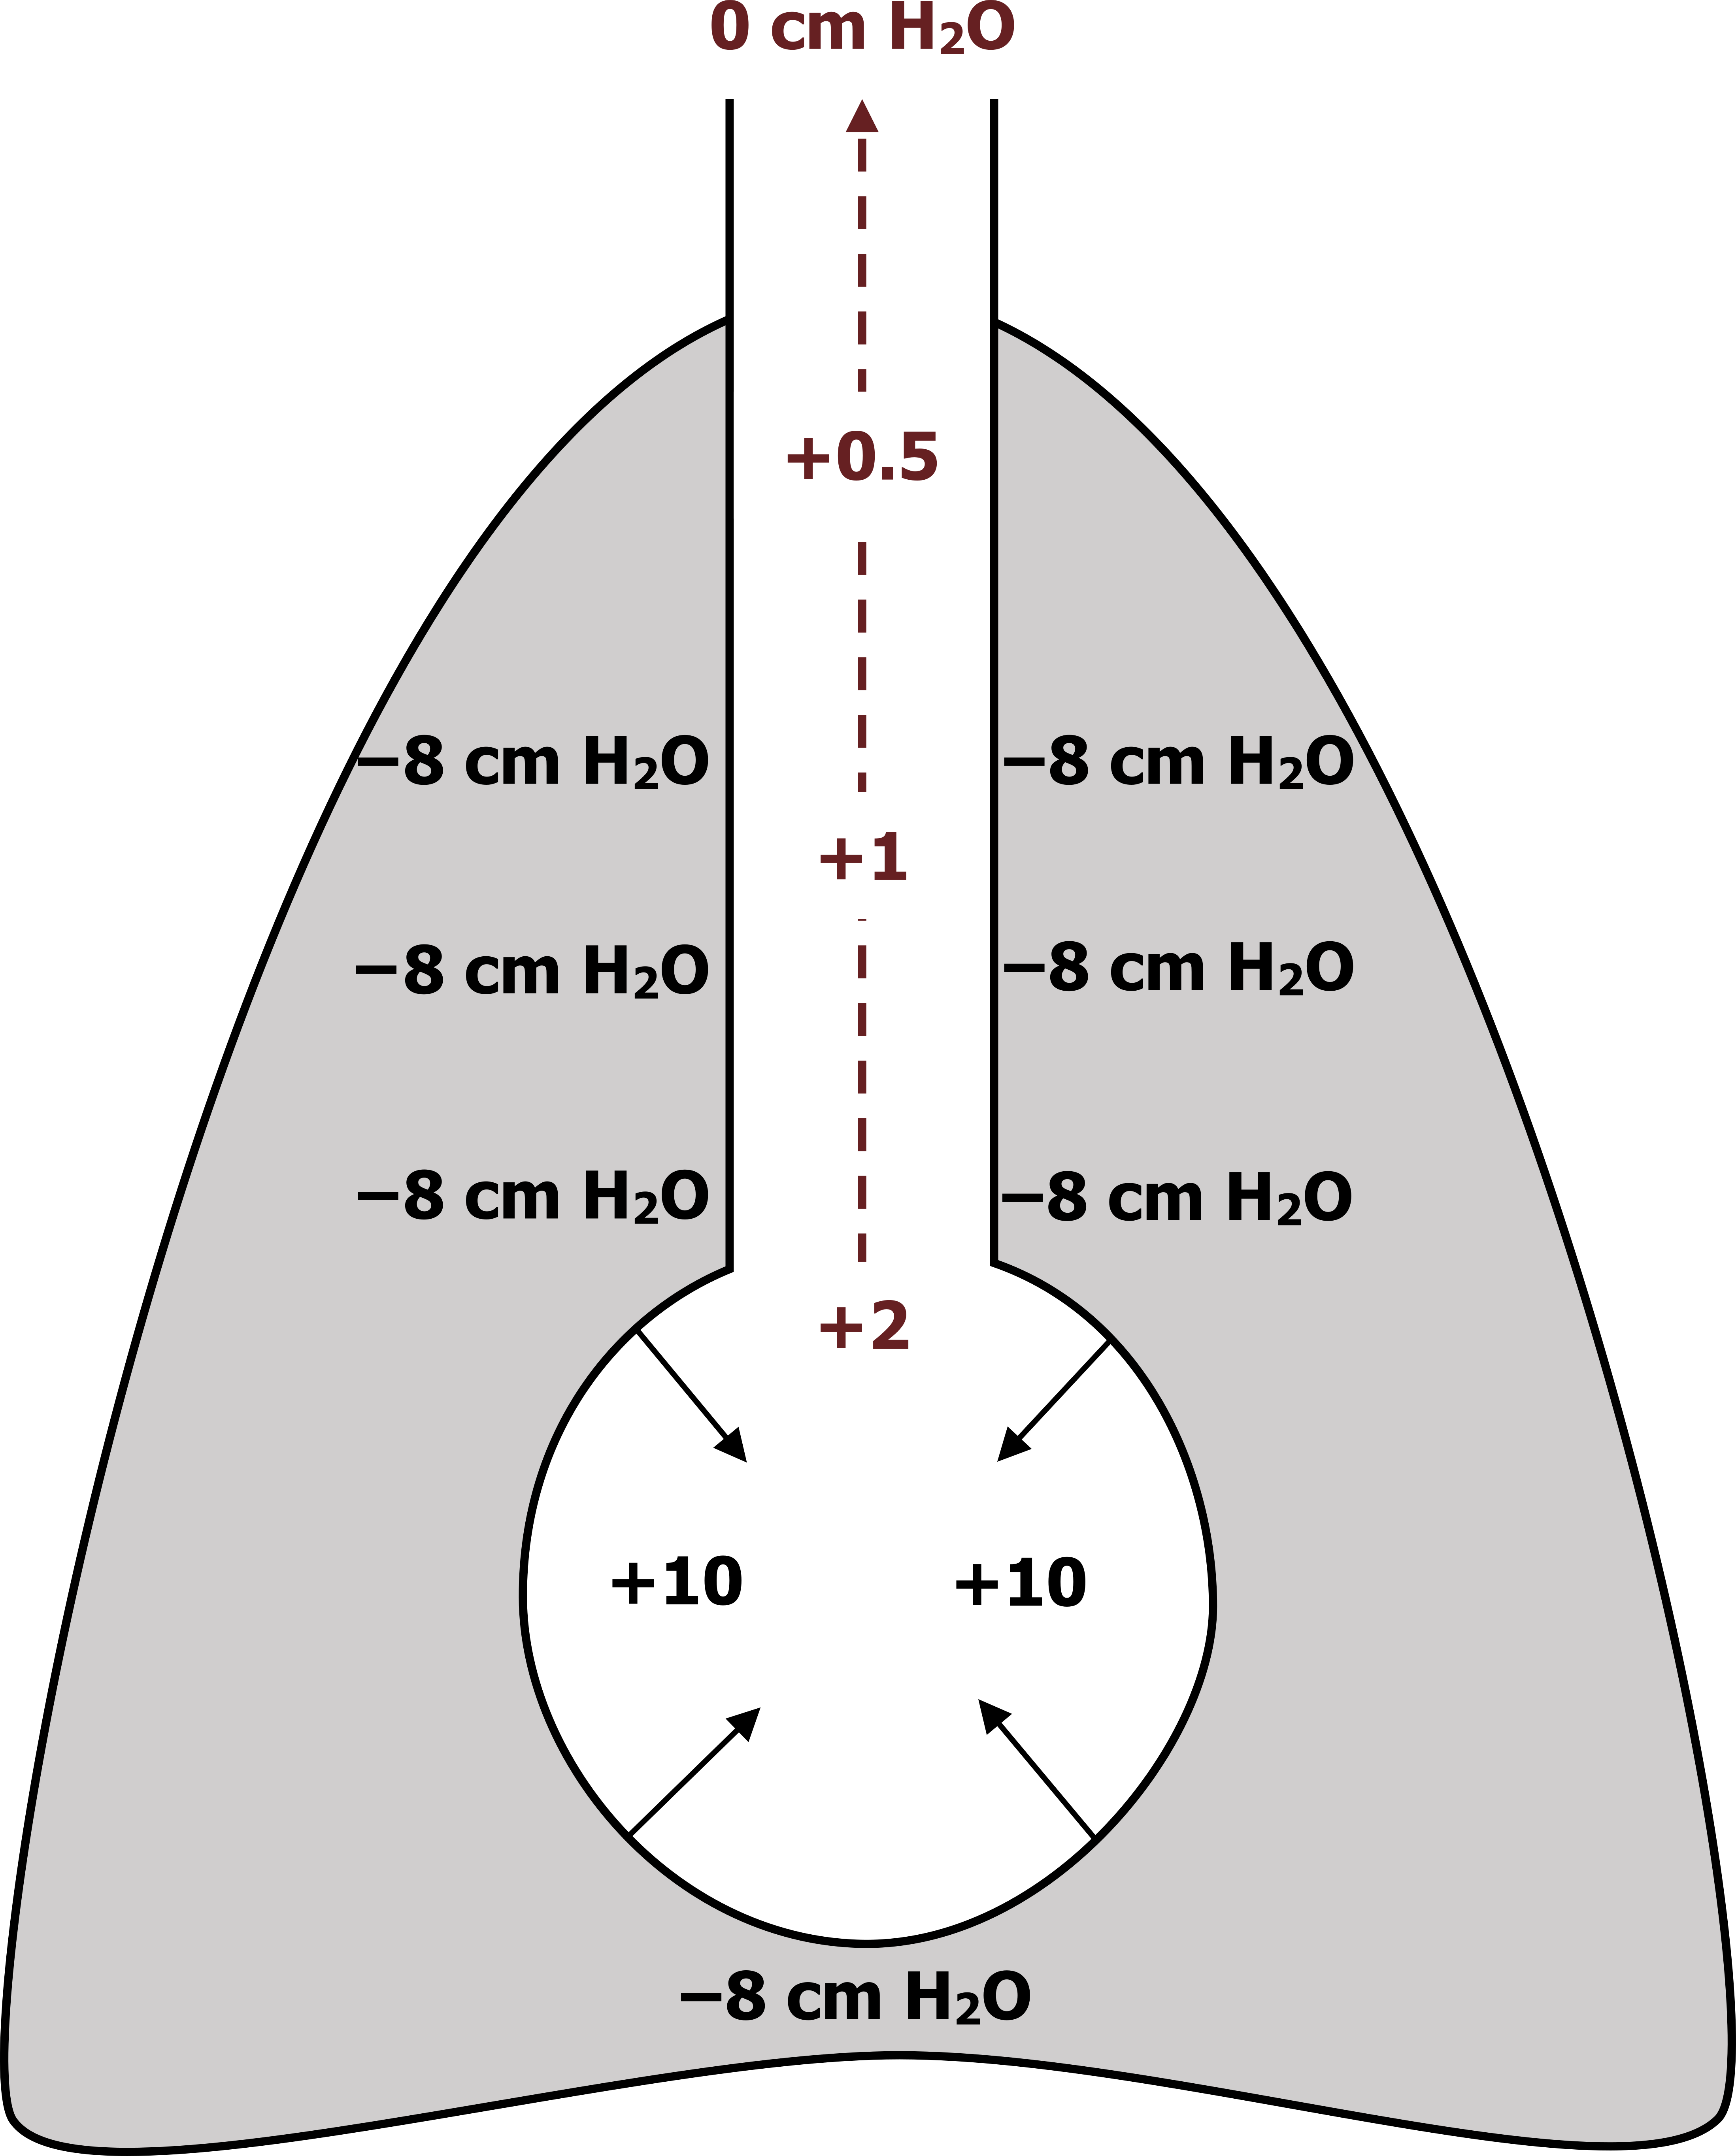 Single alveolus is pictured as a circle with a rectangular stem on top inside the thoracic cavity depicted as a rectangle with a rounded top. 4 arrows pointing into the middle of the circle with text +10. Arrow beginning from circle to end of rectangular stem; +2 arrow +1 arrow +0.5 arrow at opening 0 cmH2O. In the thoracic cavity, multiple text says -8 cmH2O.